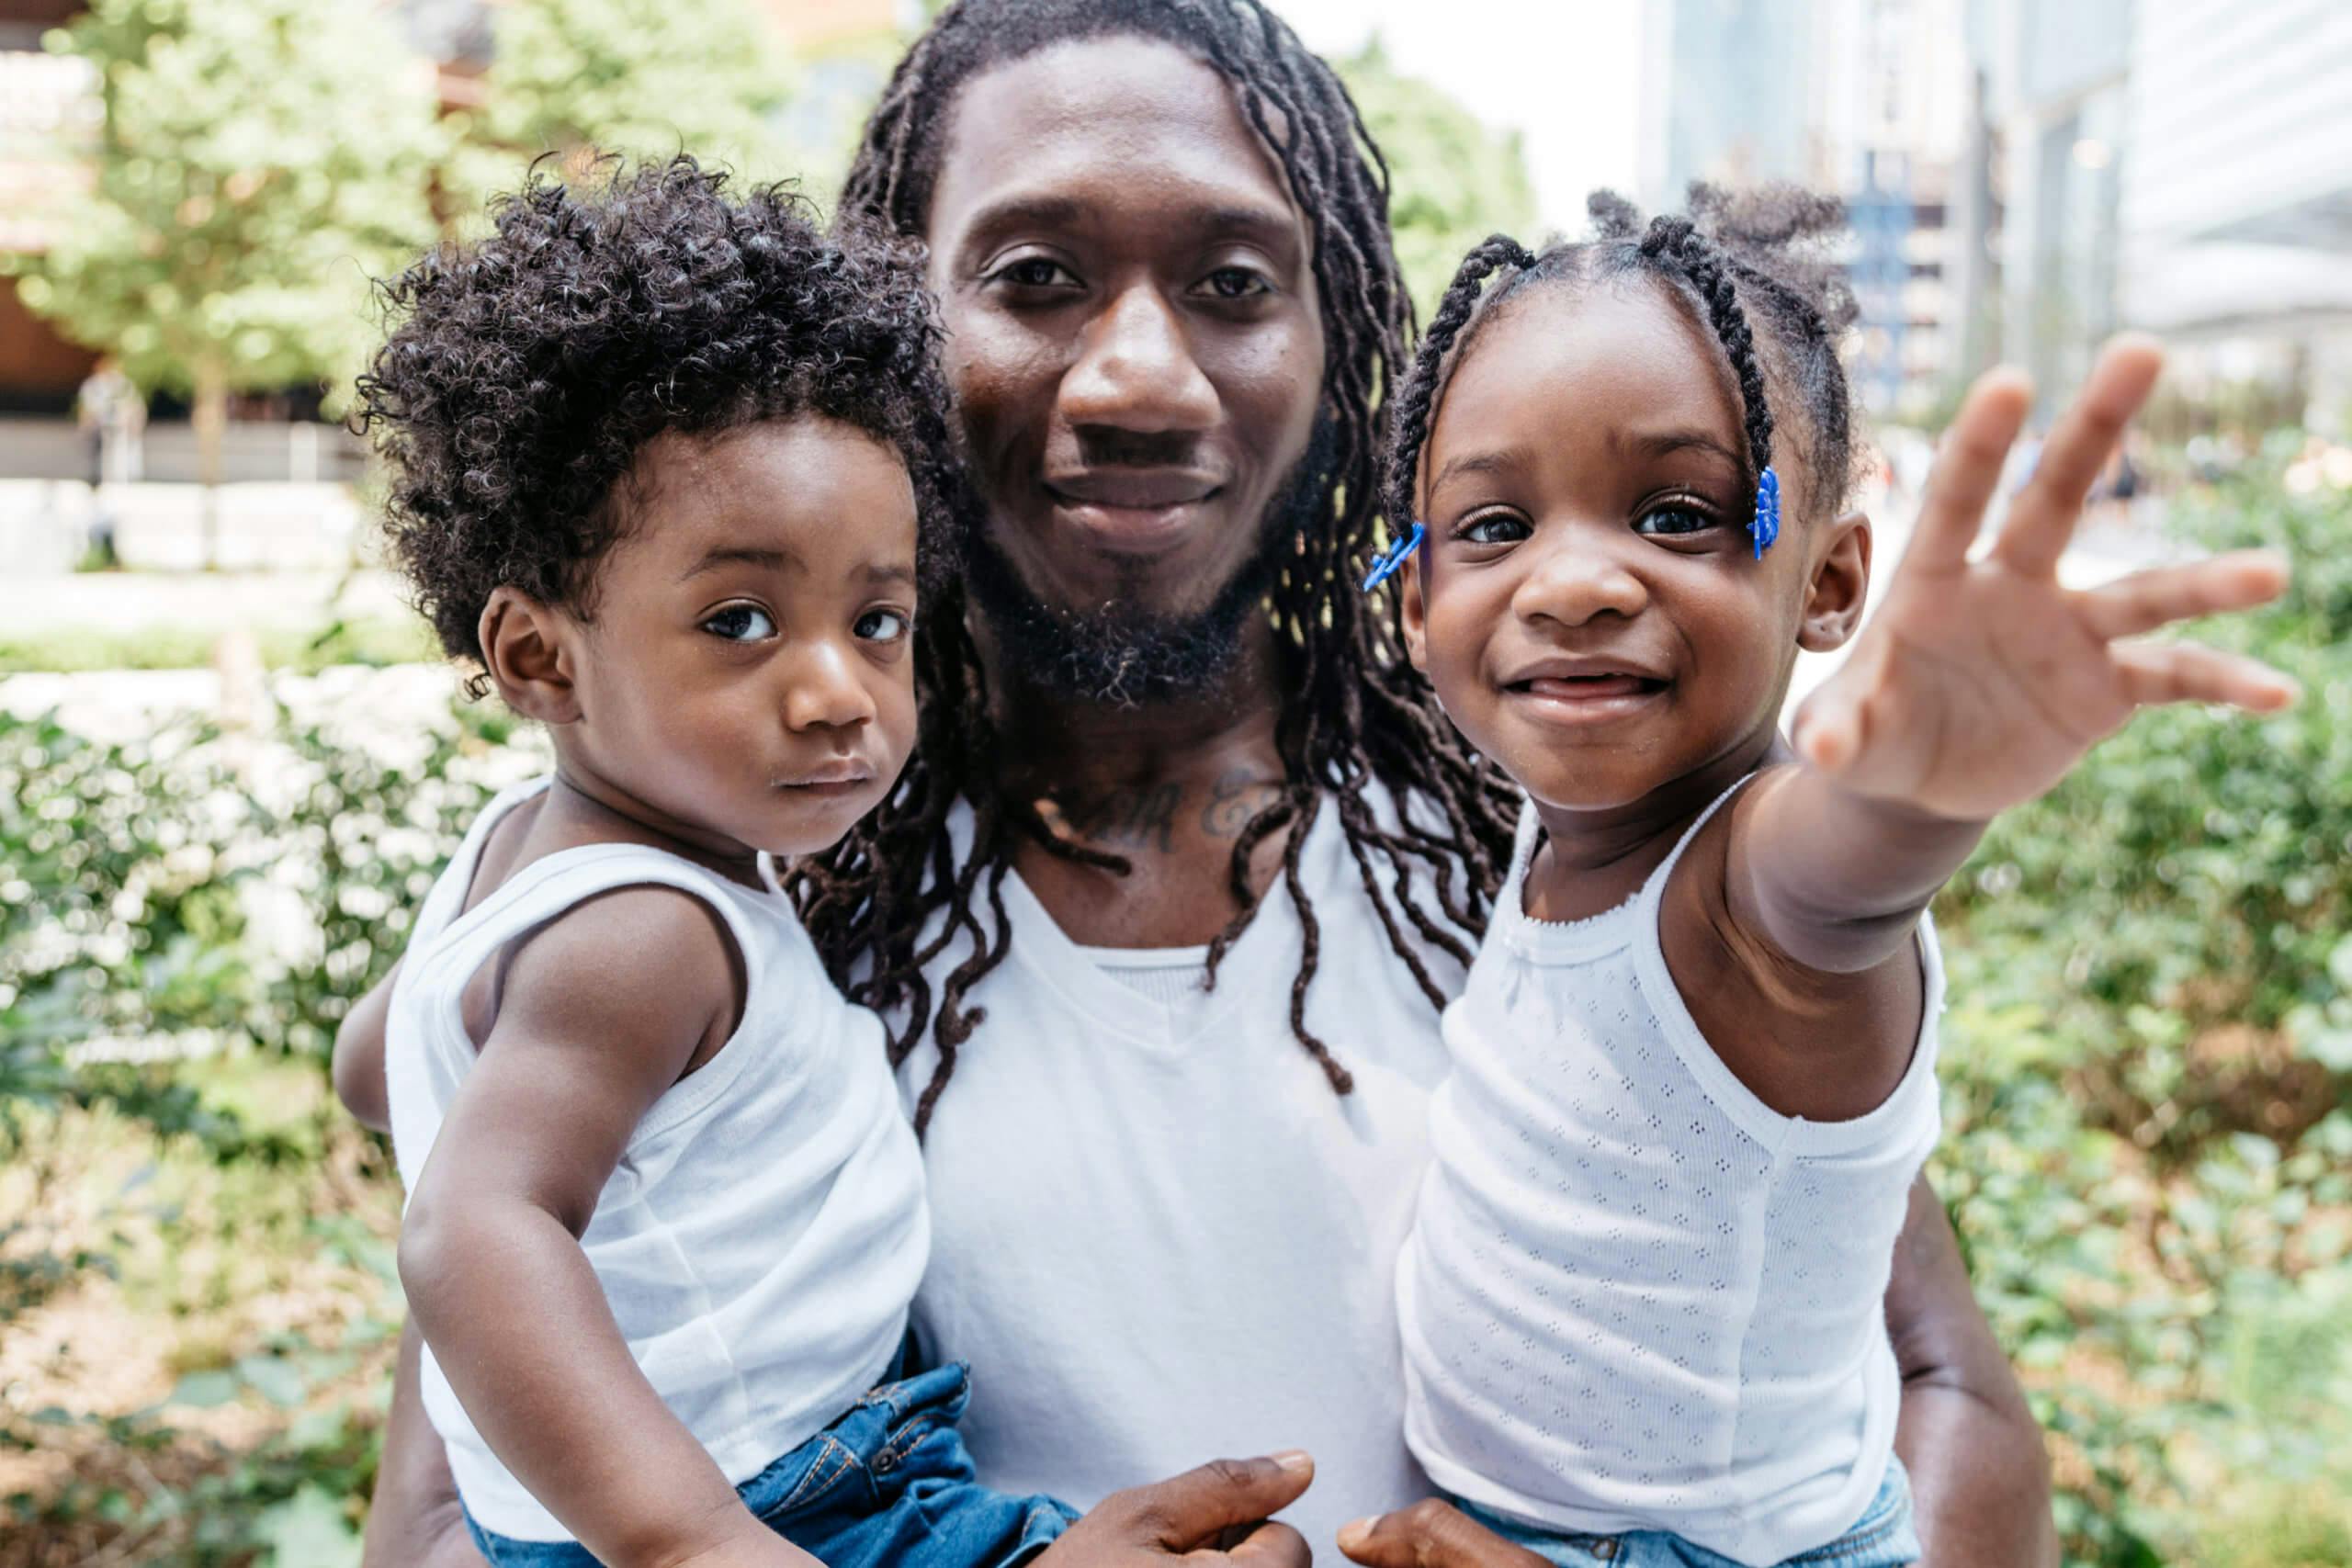 A man with long dreadlocks holding two young children